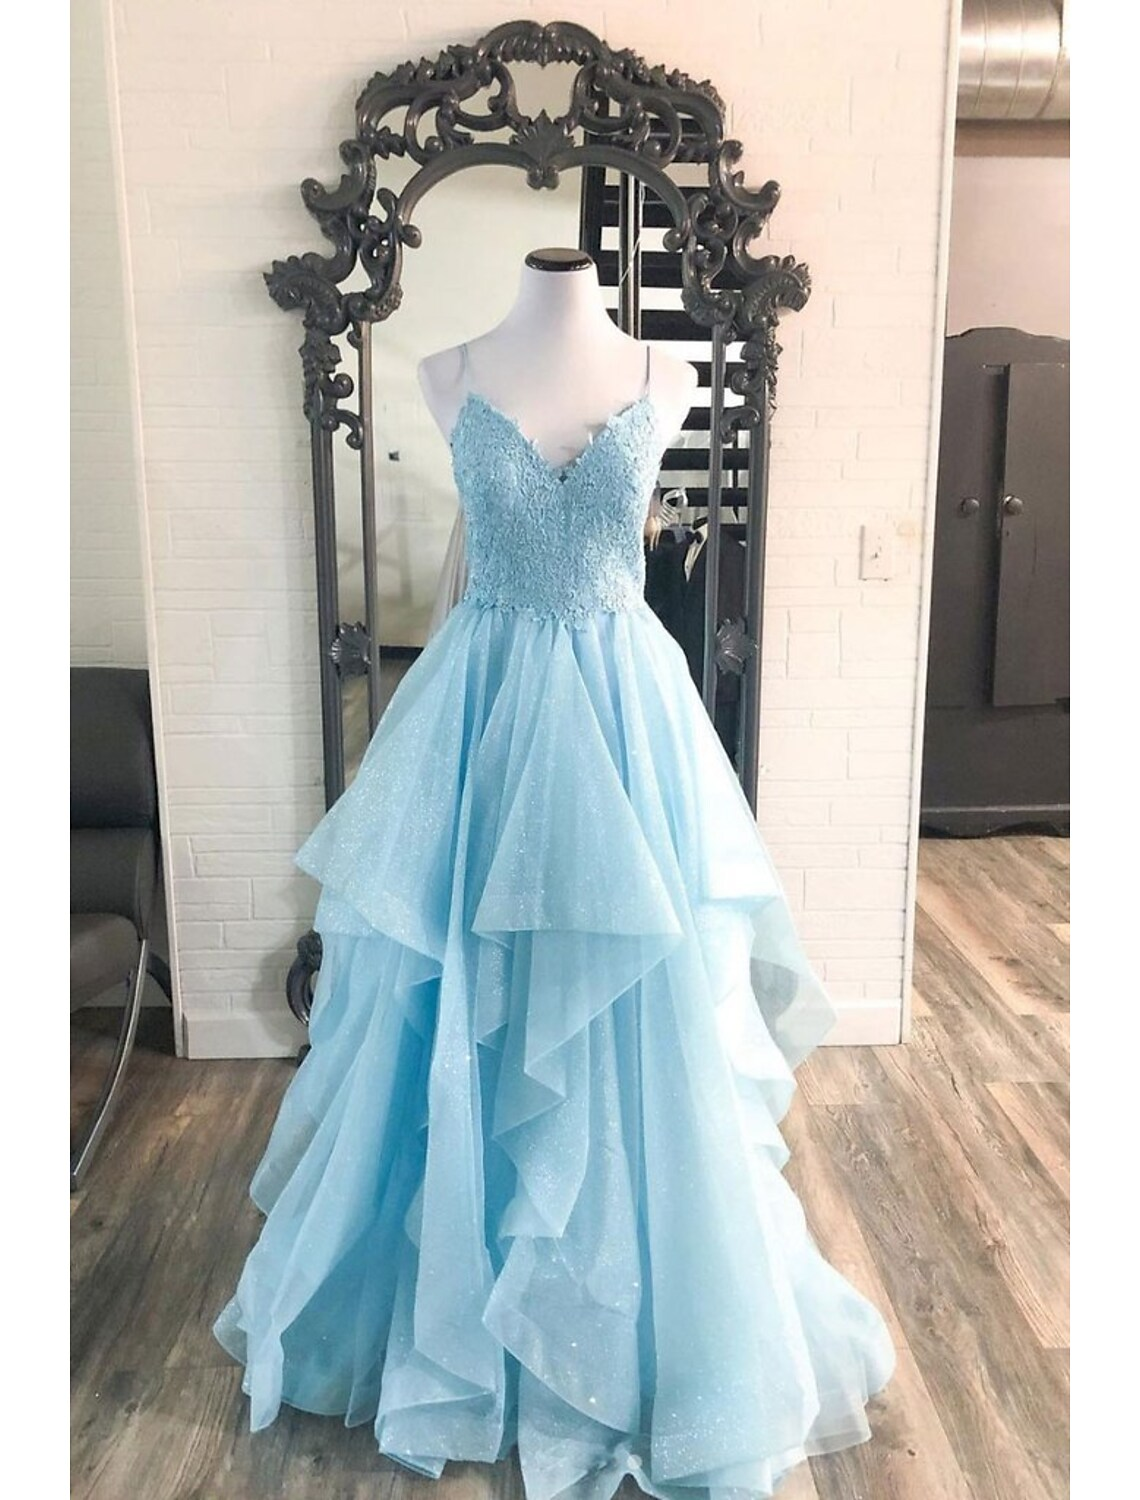 Ball Gown Prom Dresses Princess Dress Formal Floor Length Sleeveless V Neck Tulle Backless with Pleats Appliques